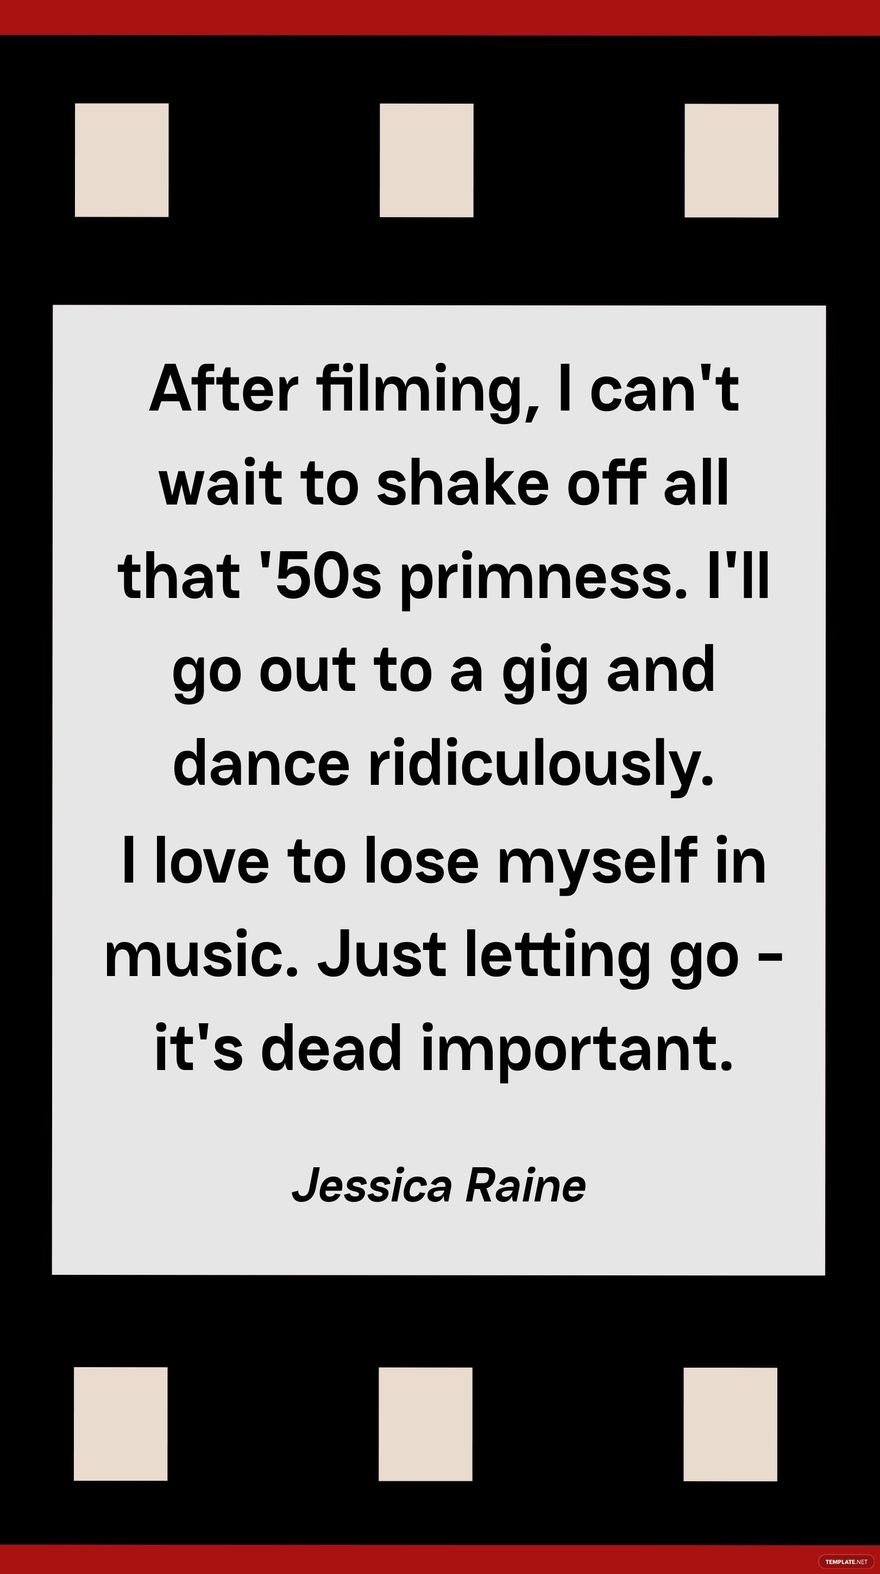 Jessica Raine - After filming, I can't wait to shake off all that '50s primness. I'll go out to a gig and dance ridiculously. I love to lose myself in music. Just letting go - it's dead important.